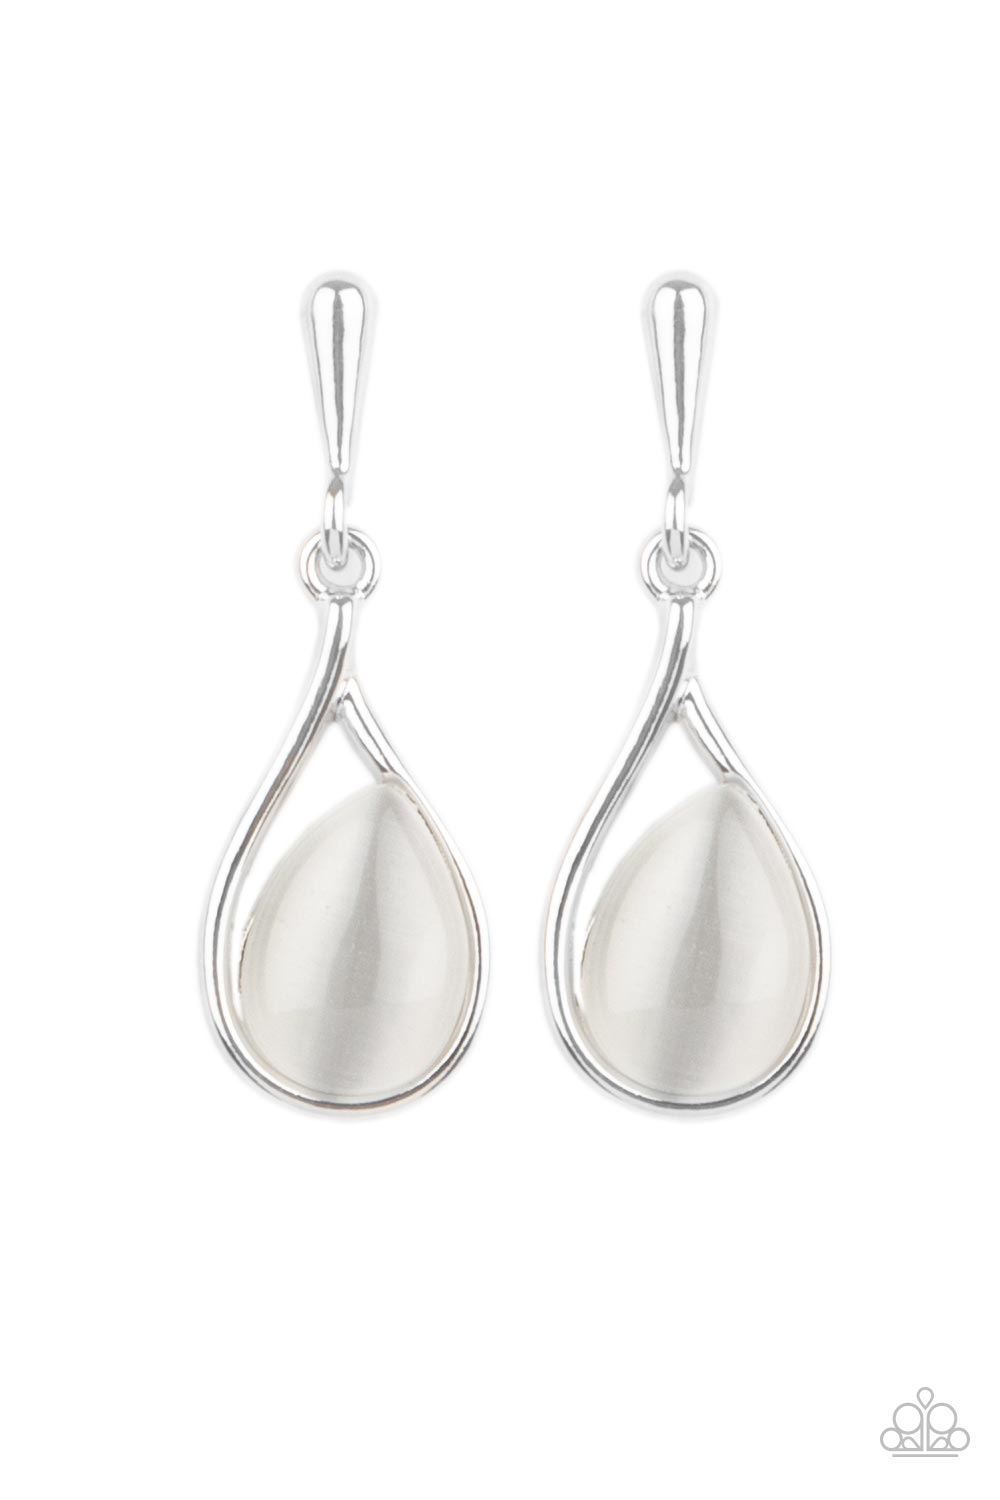 Pampered Glow Up White Cat's Eye Stone Post Earrings Paparazzi Accessories. Get Free Shipping